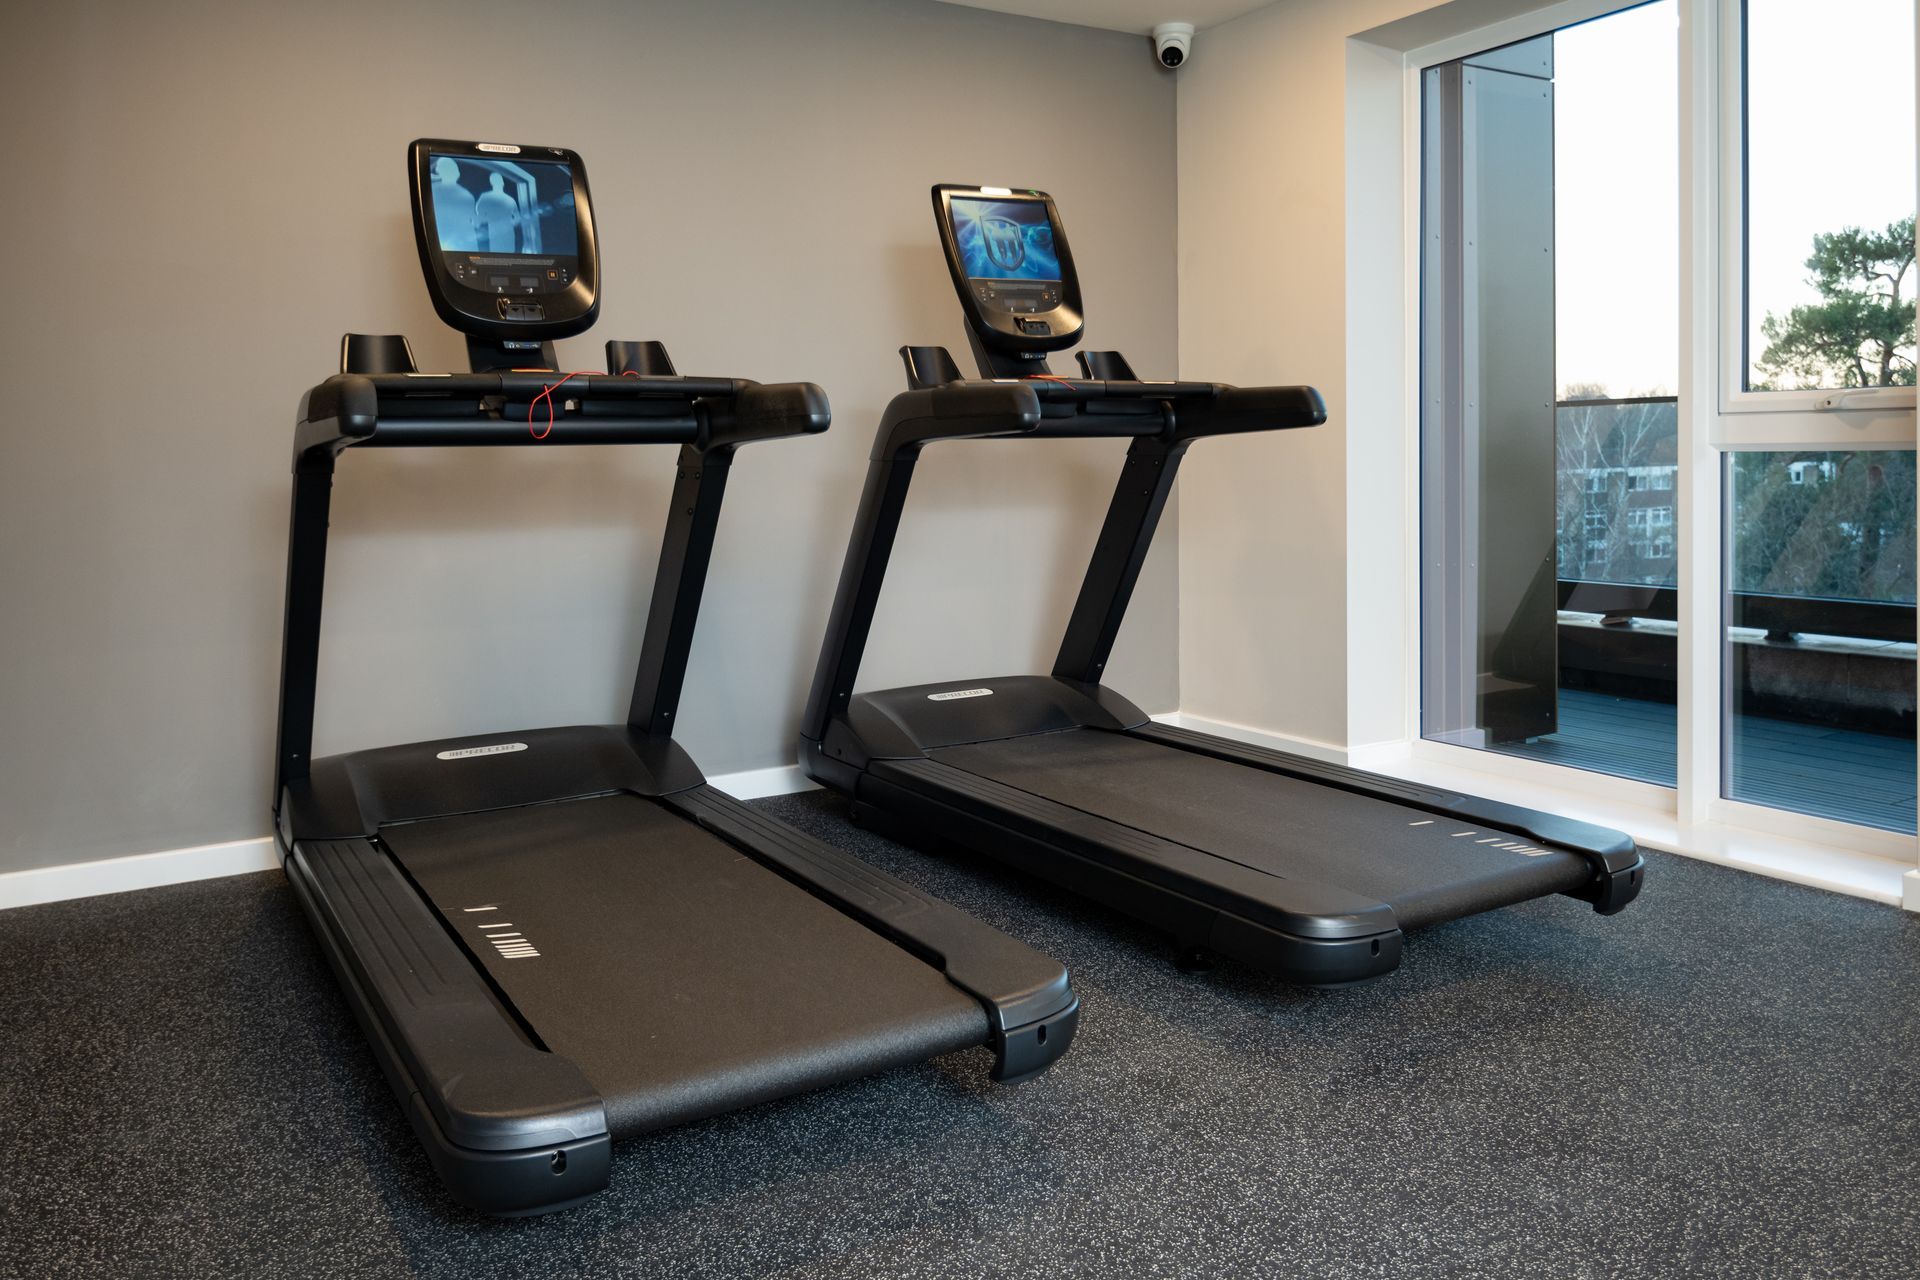 Two treadmills are sitting next to each other in a gym at Walton Court.